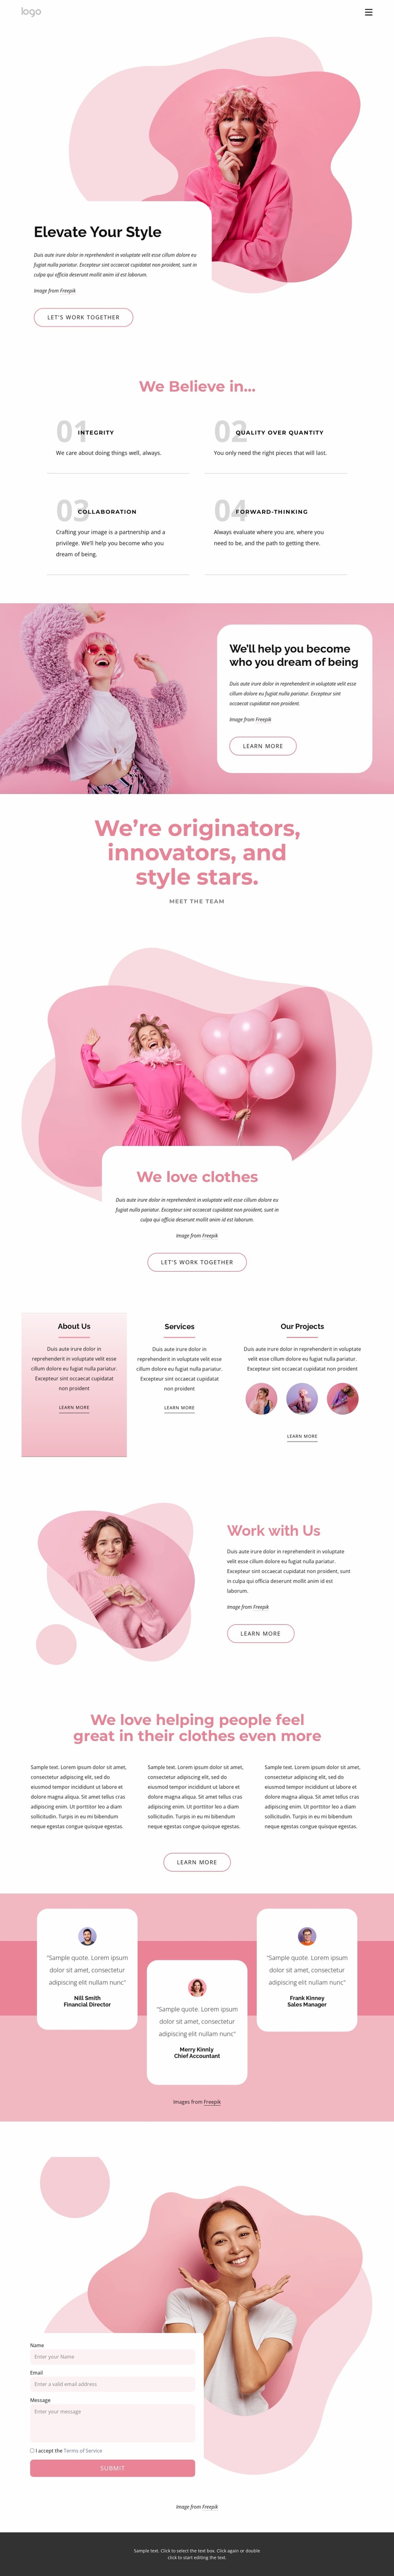 Elevate your style eCommerce Template